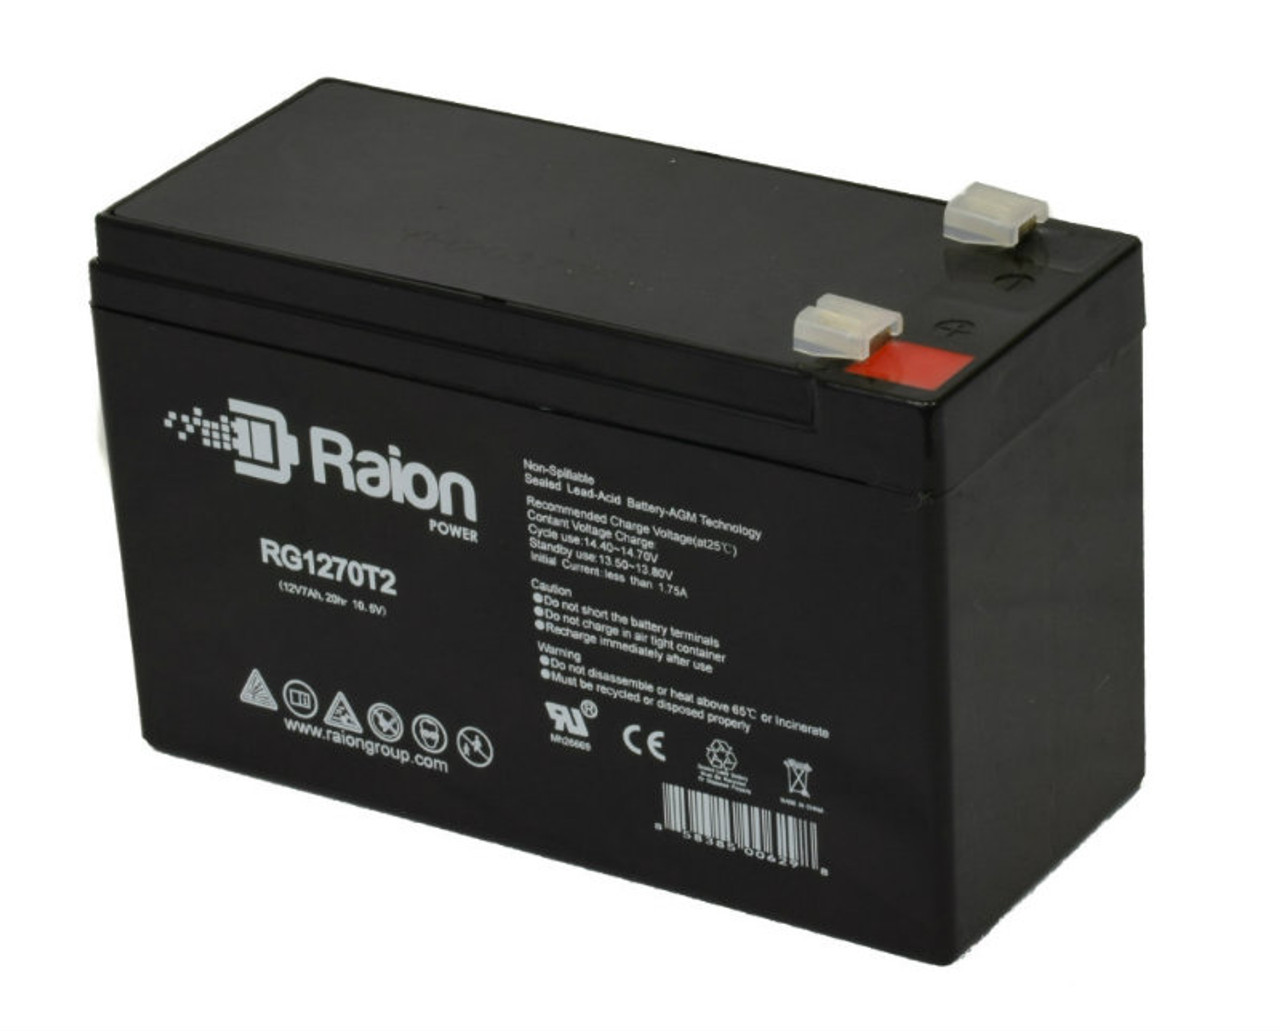 Raion Power RG1270T1 12V 7Ah Non-Spillable Replacement Battery for SAITE BT-12M7.0AT F1